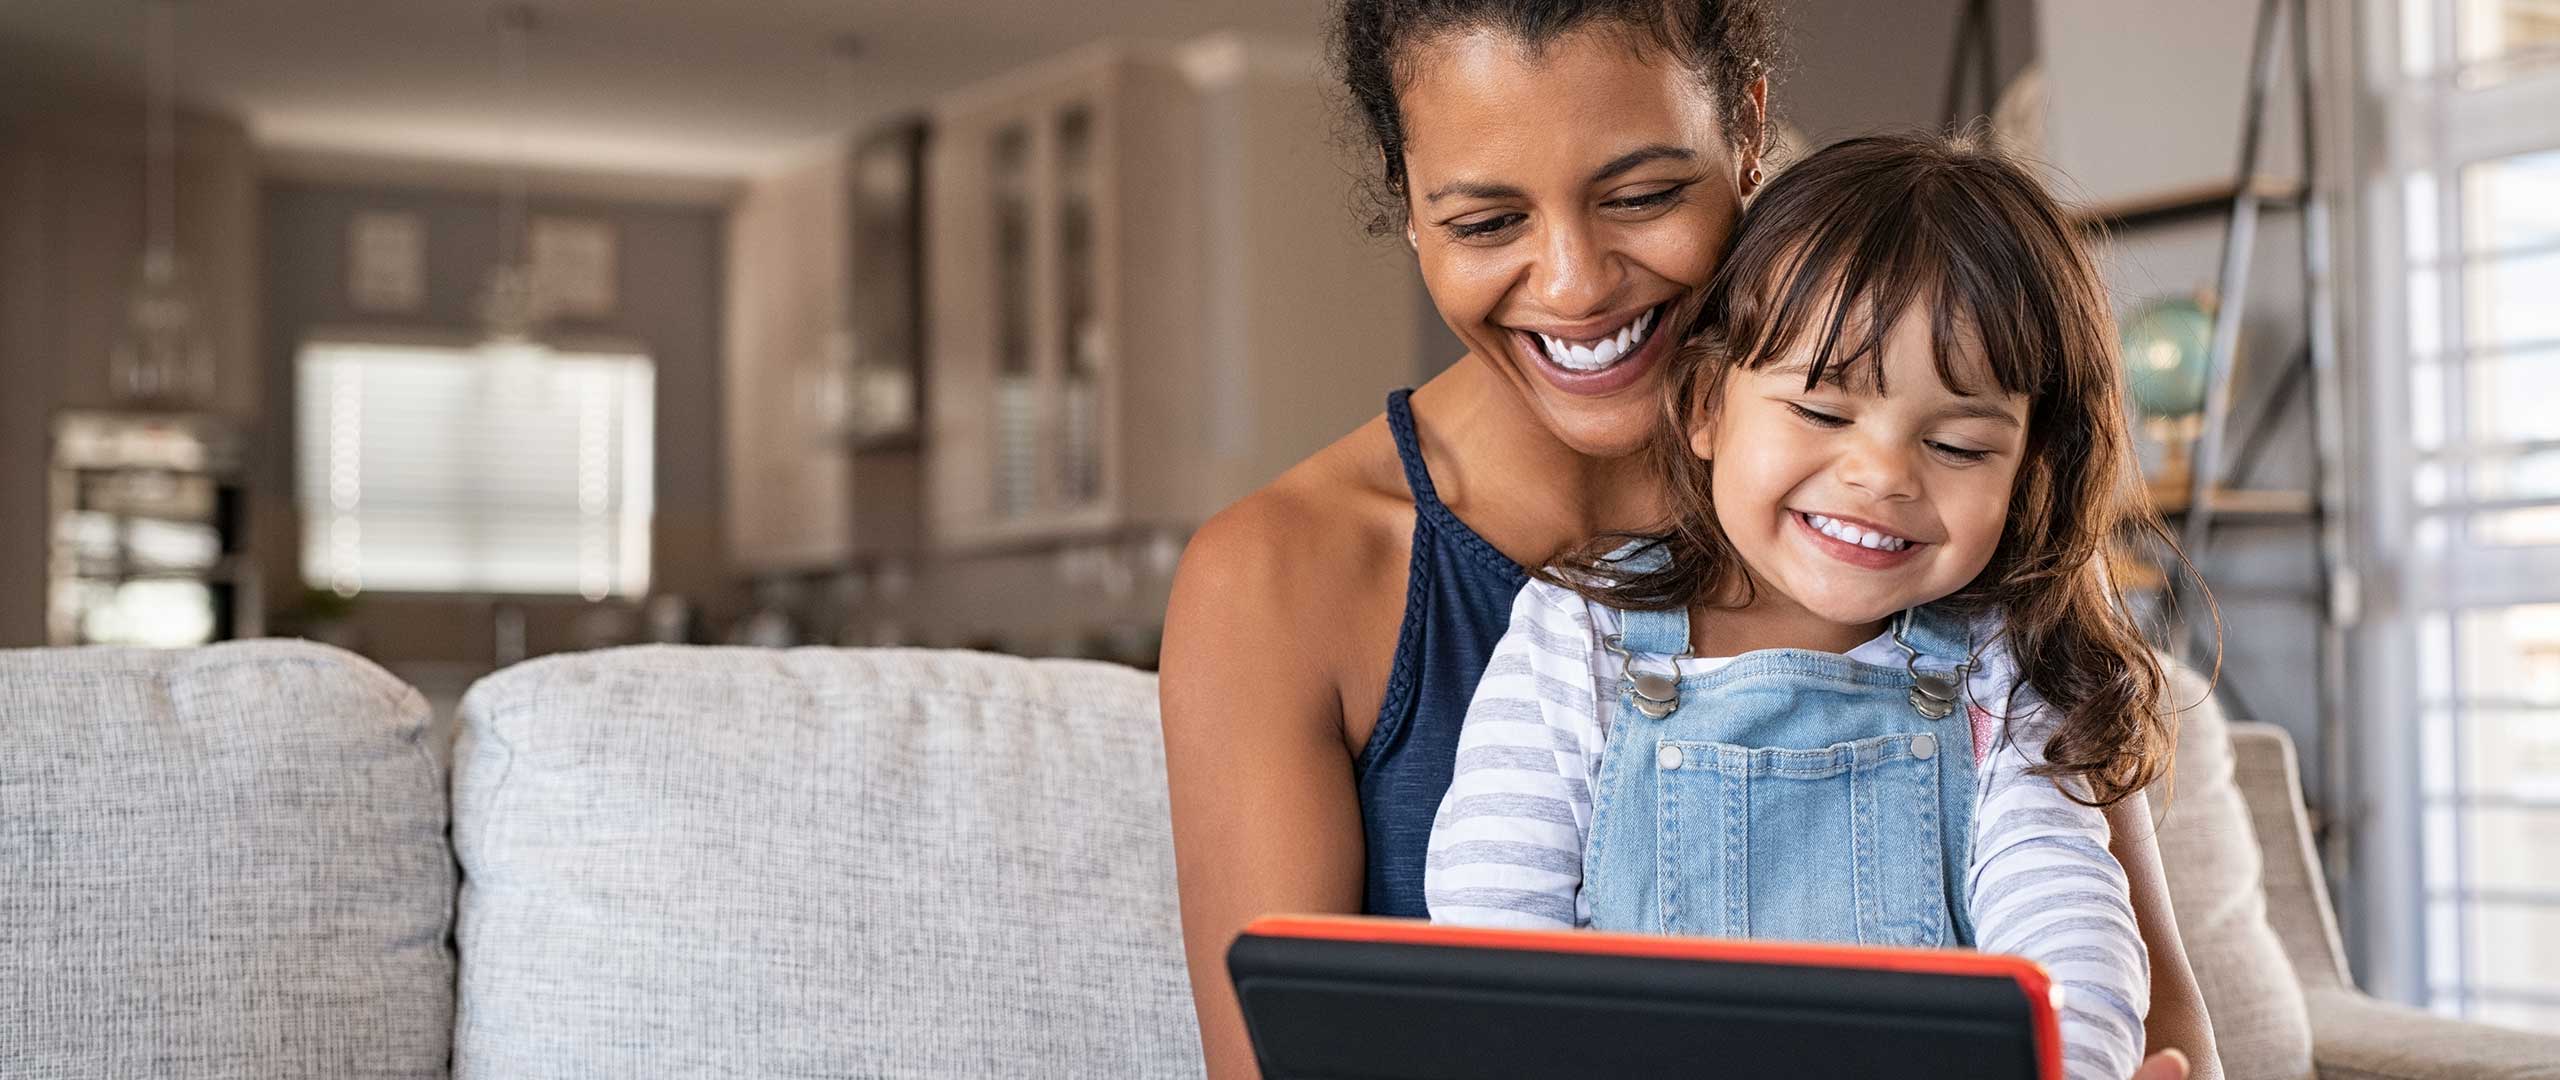 Woman and child sitting with a tablet device.